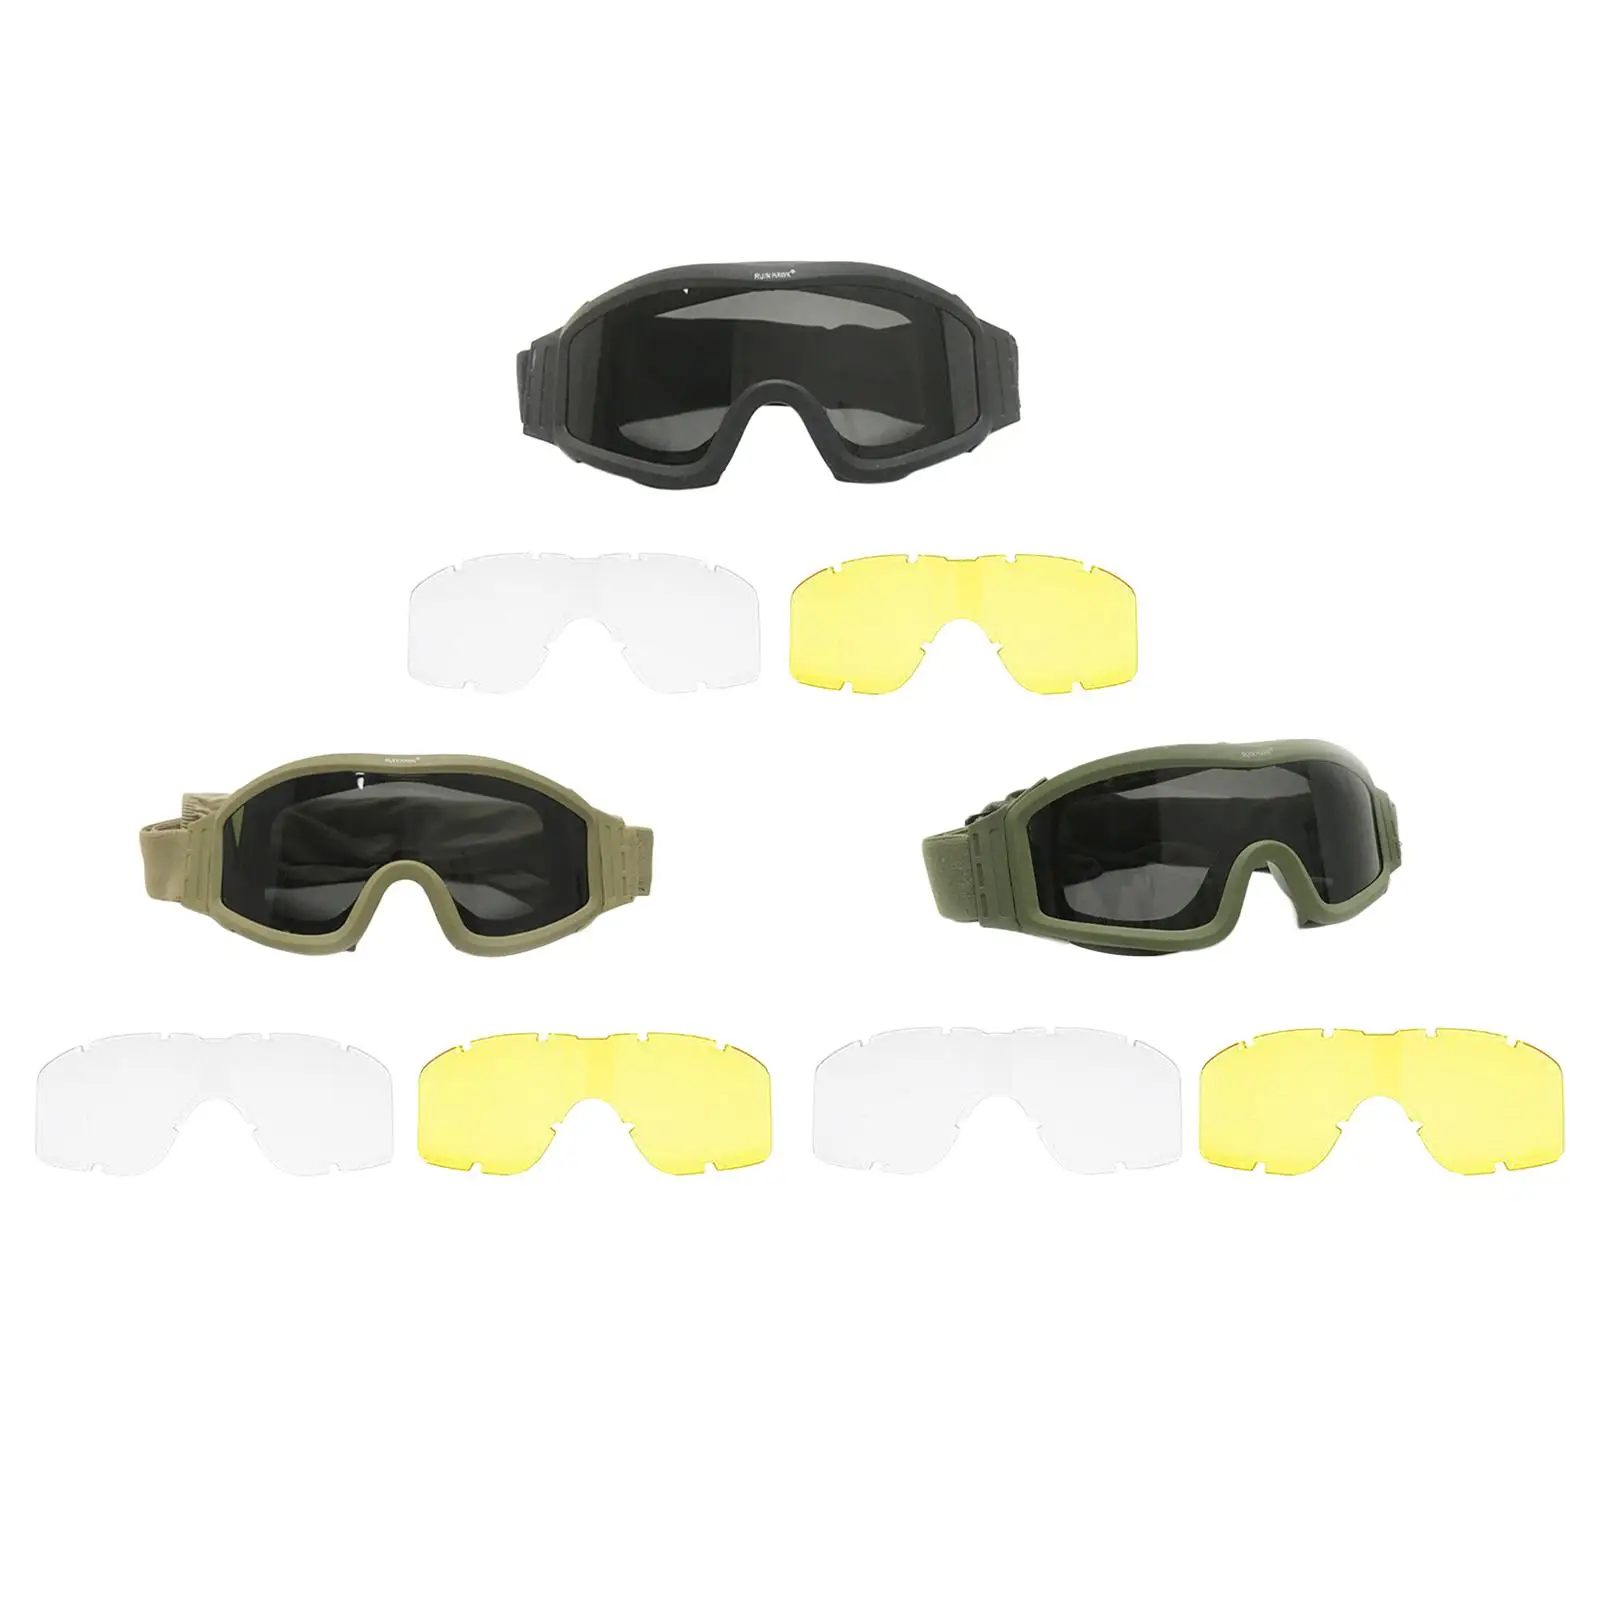 Goggles Glasses Anti UV Adjustable Scratch Resistant for Biking Shooting